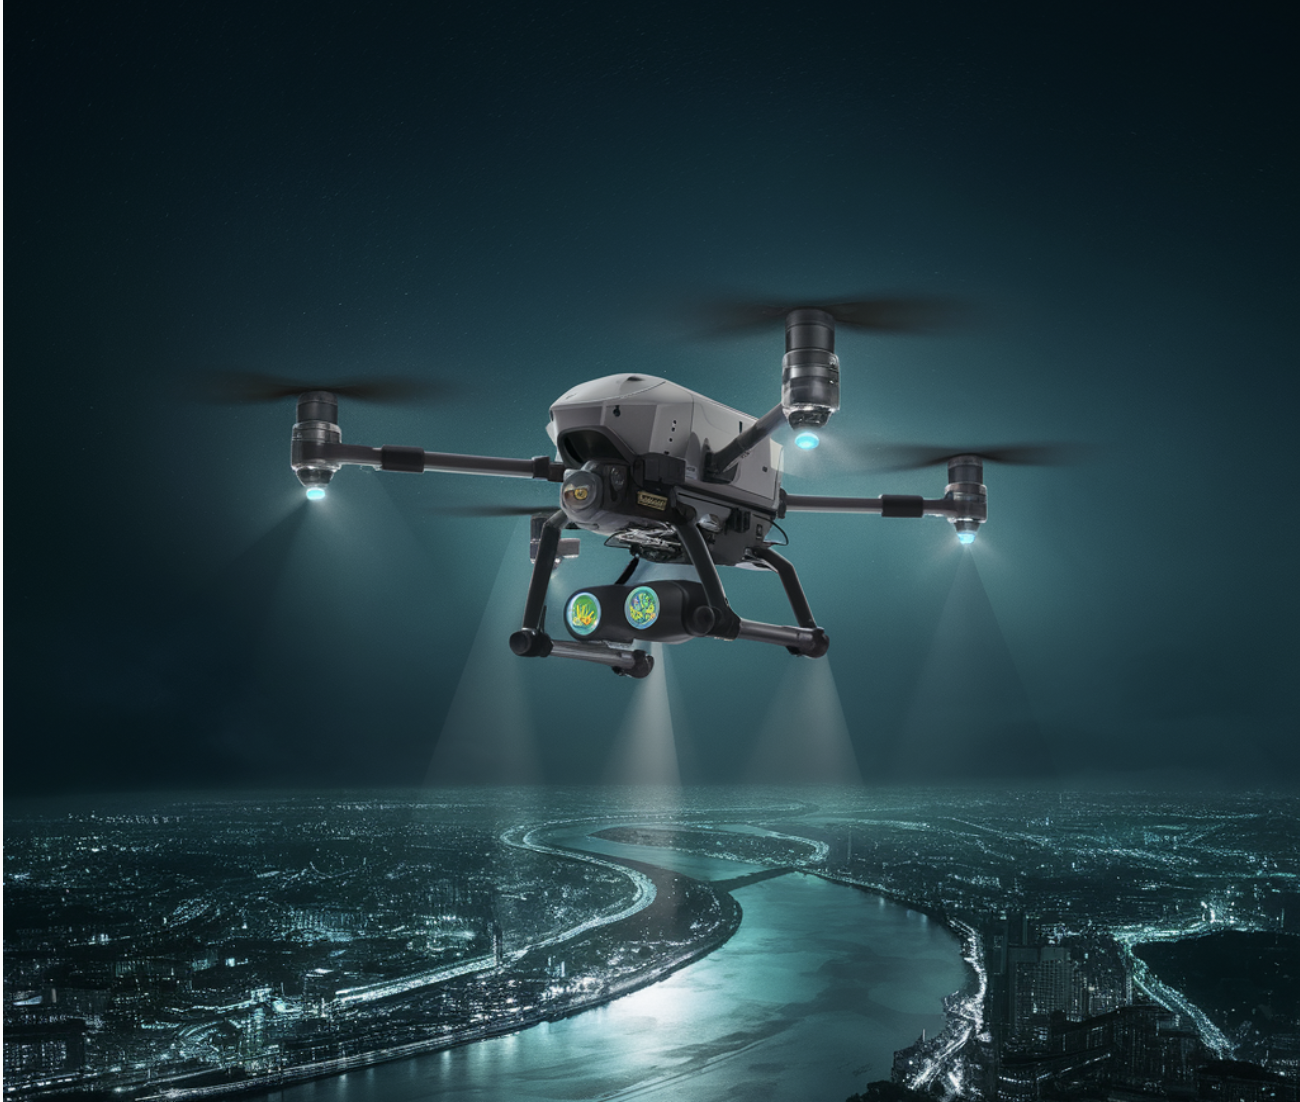 Autonomous Navigation for Aerial Vehicles at Night